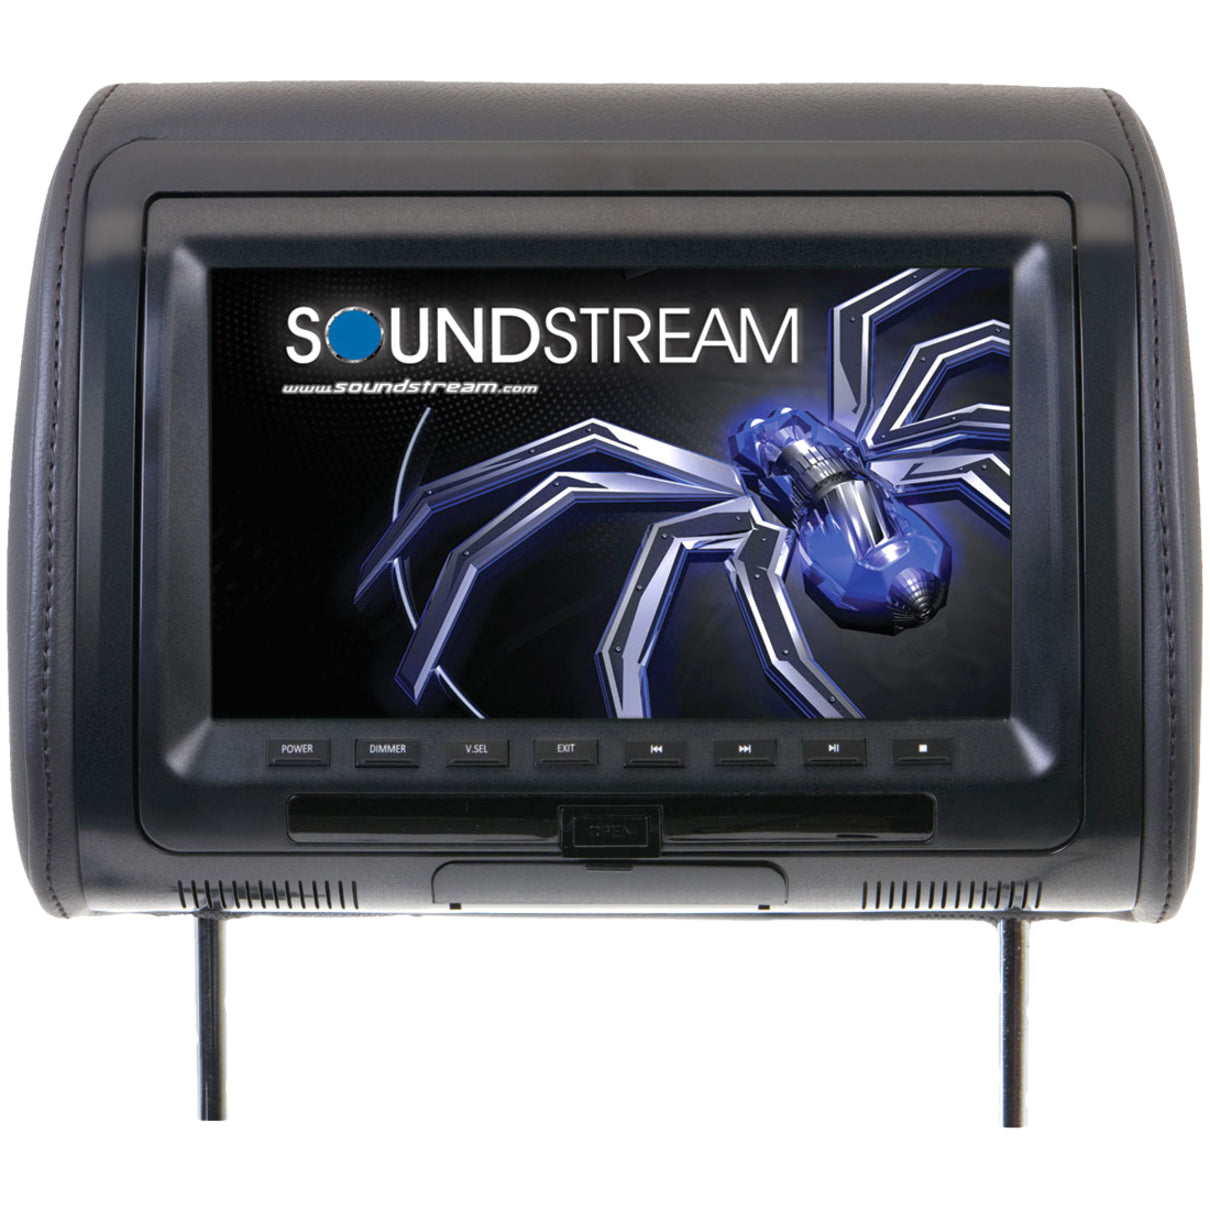 Soundstream VHD-90CC Car DVD Player - 9" LCD - Single DIN [Discontinued]